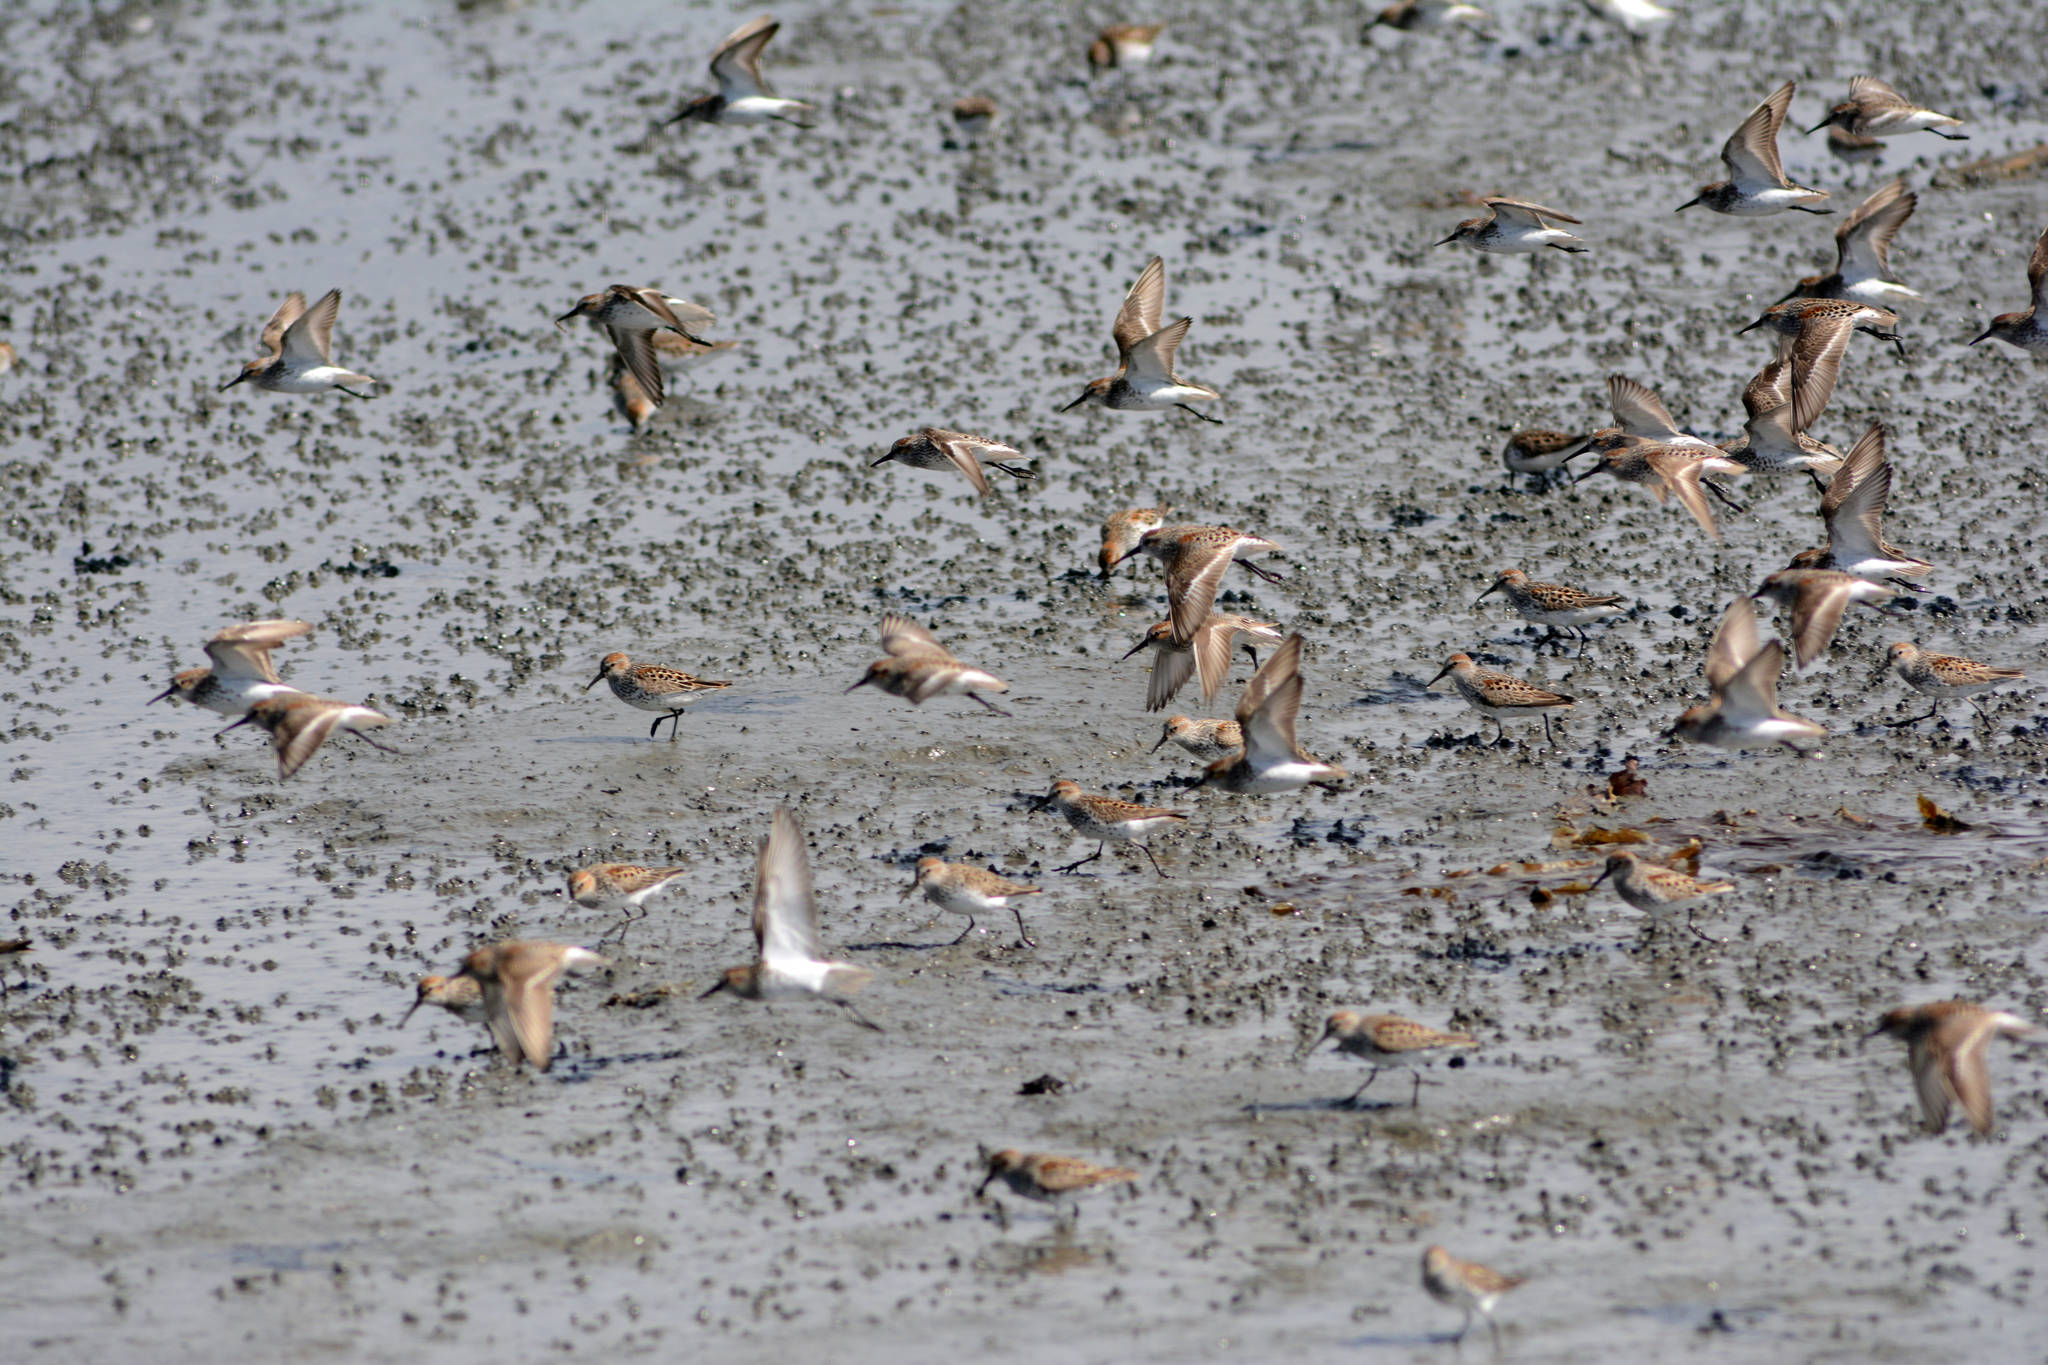 Shorebirds visit right on time